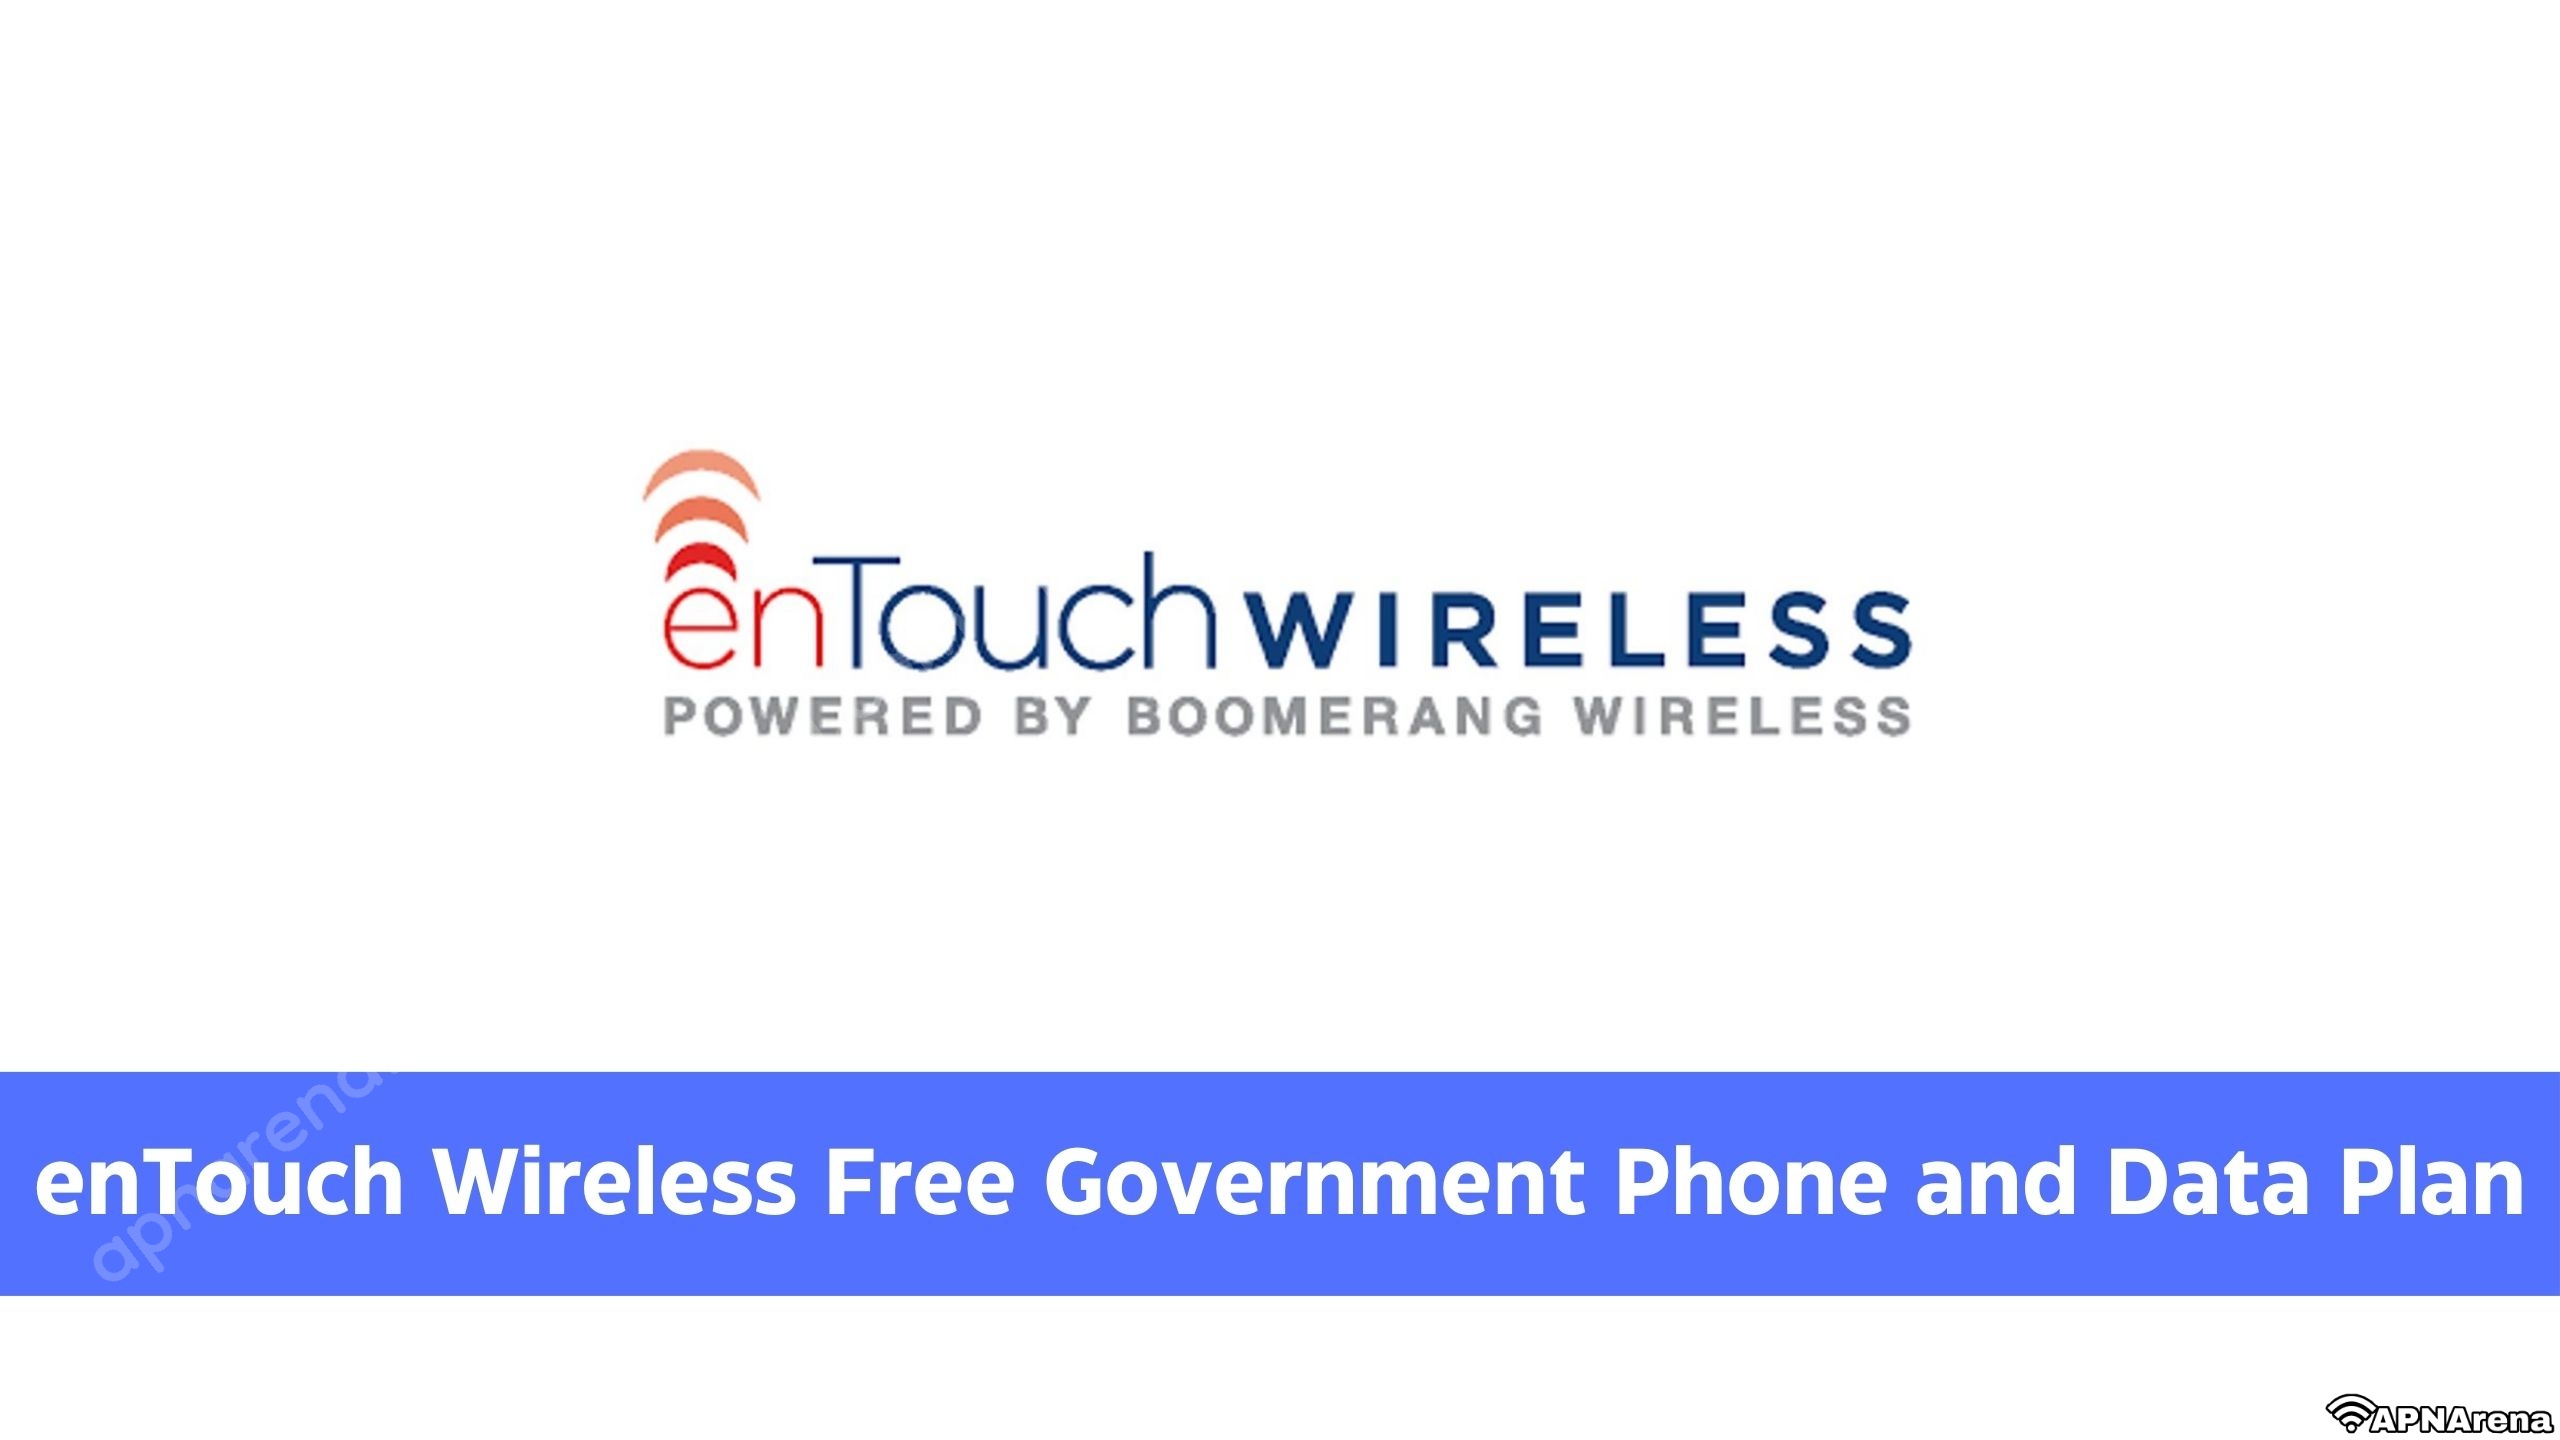 enTouch Wireless Free Government Phone and Data Plan, Lifeline, ACP, EBB, Application Status, SIM & Smartphone Activation Process